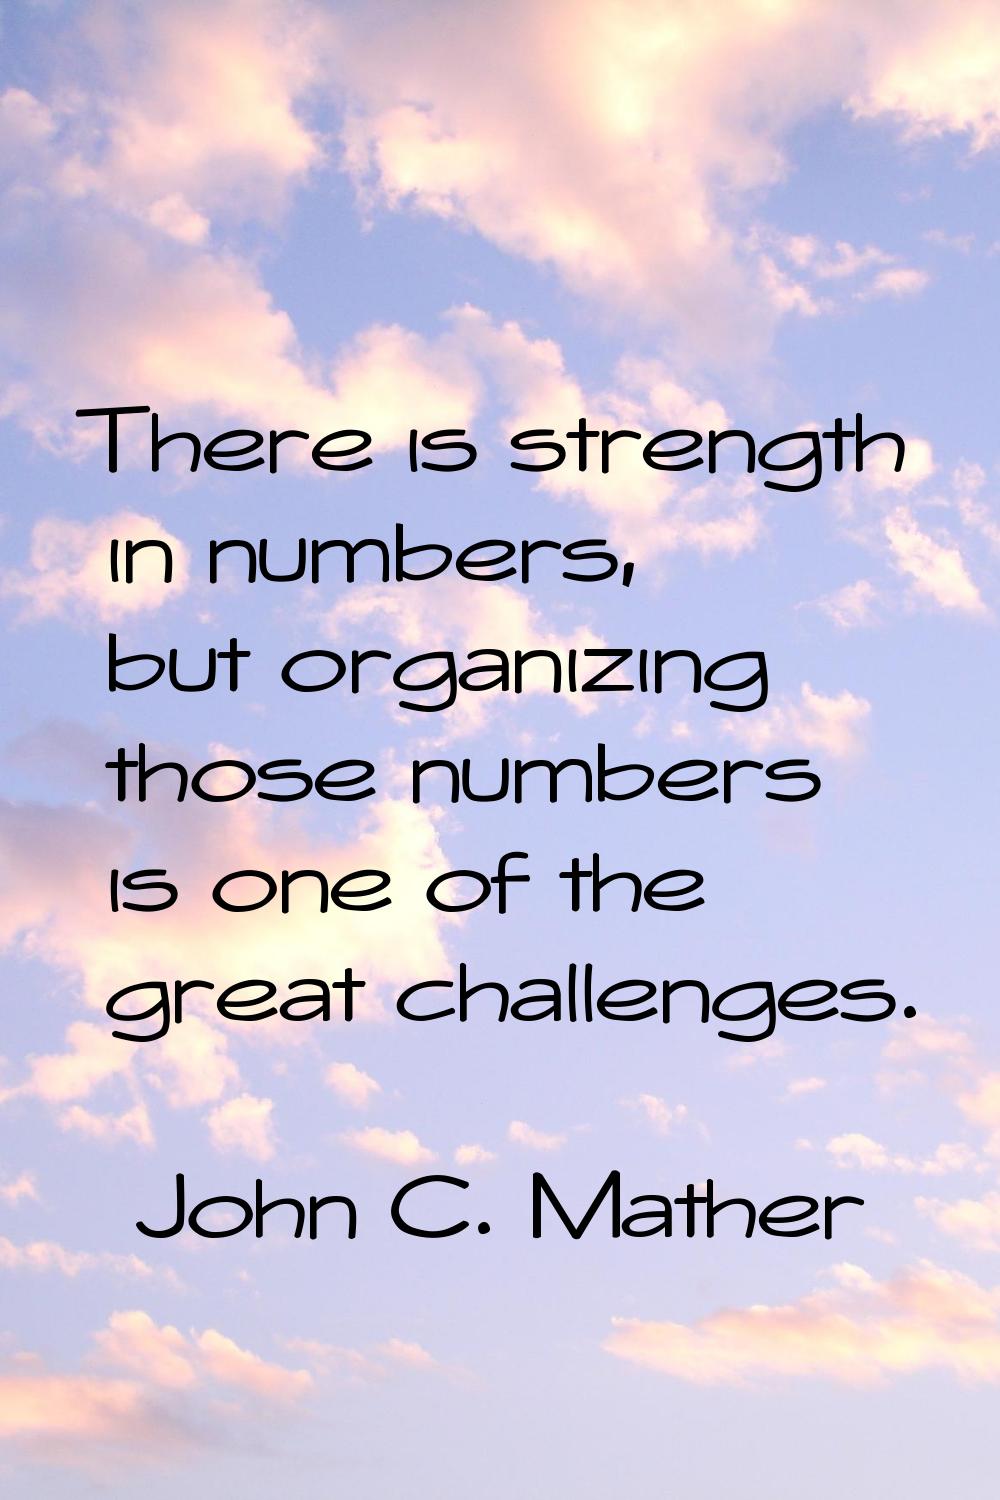 There is strength in numbers, but organizing those numbers is one of the great challenges.